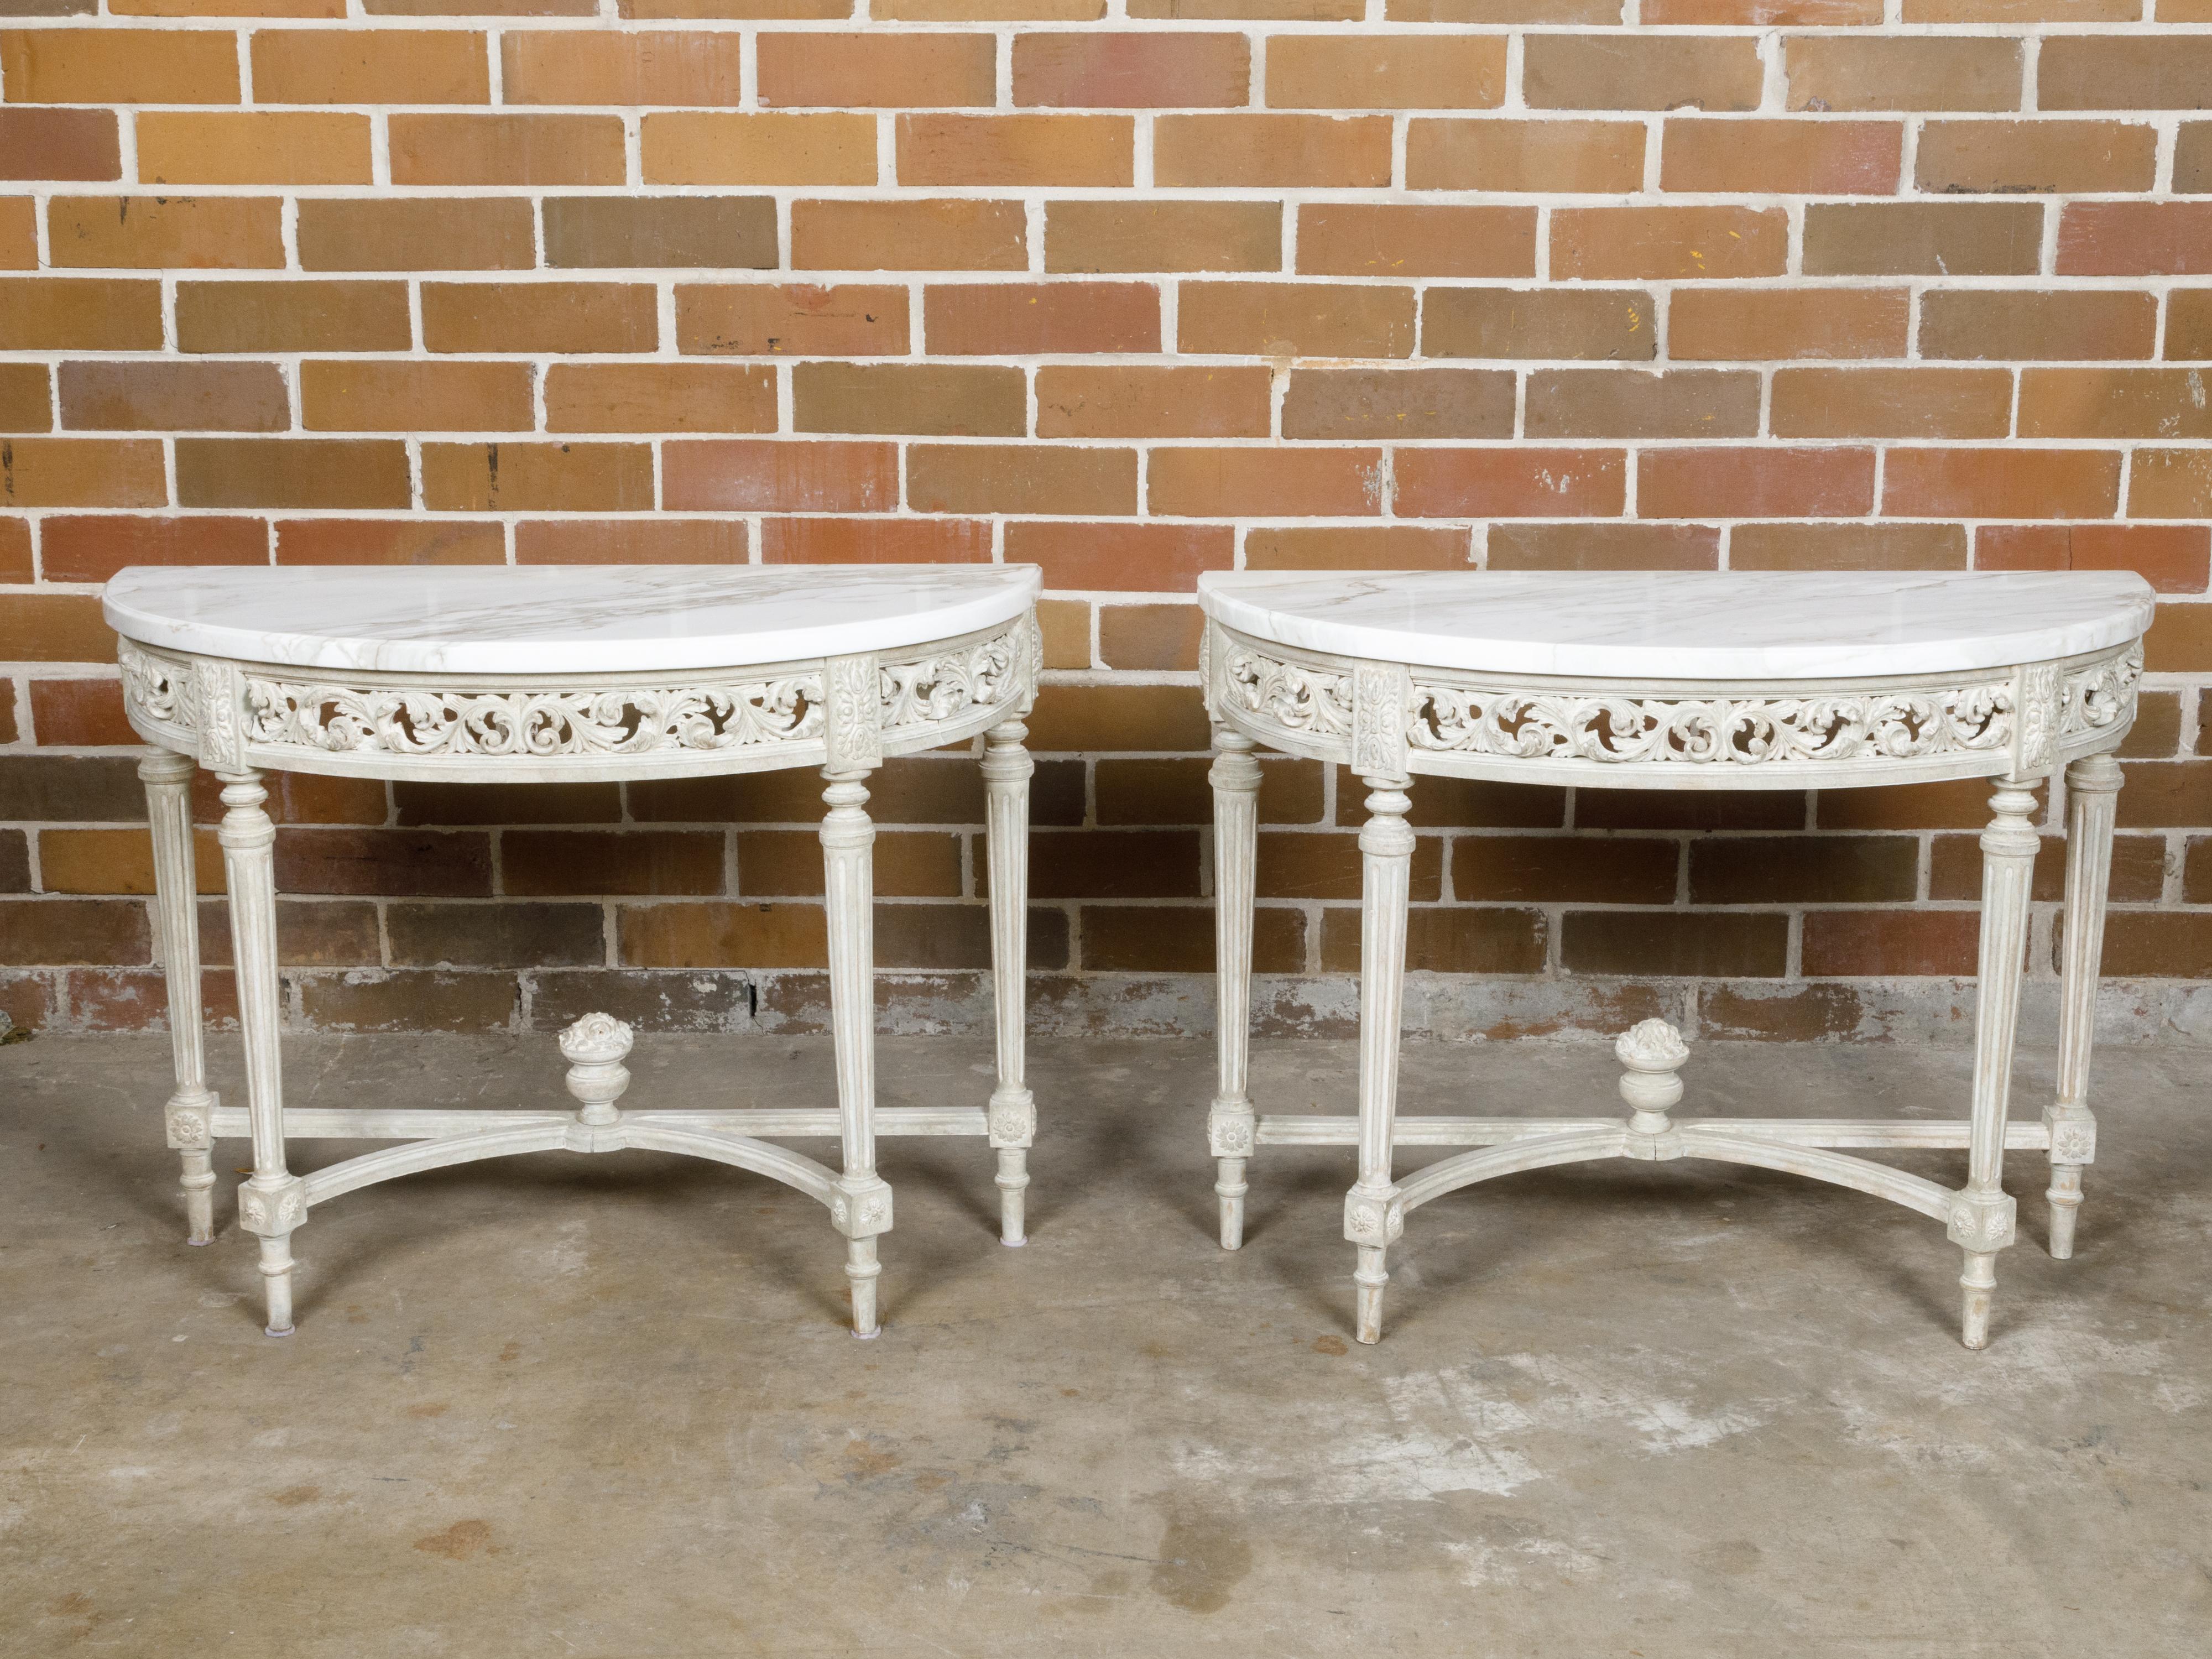 A pair of French Louis XVI style demi-lune console tables from the 19th century with white veined marble tops, carved aprons, fluted legs and arching cross-stretcher. This exquisite pair of French Louis XVI style demi-lune console tables from the